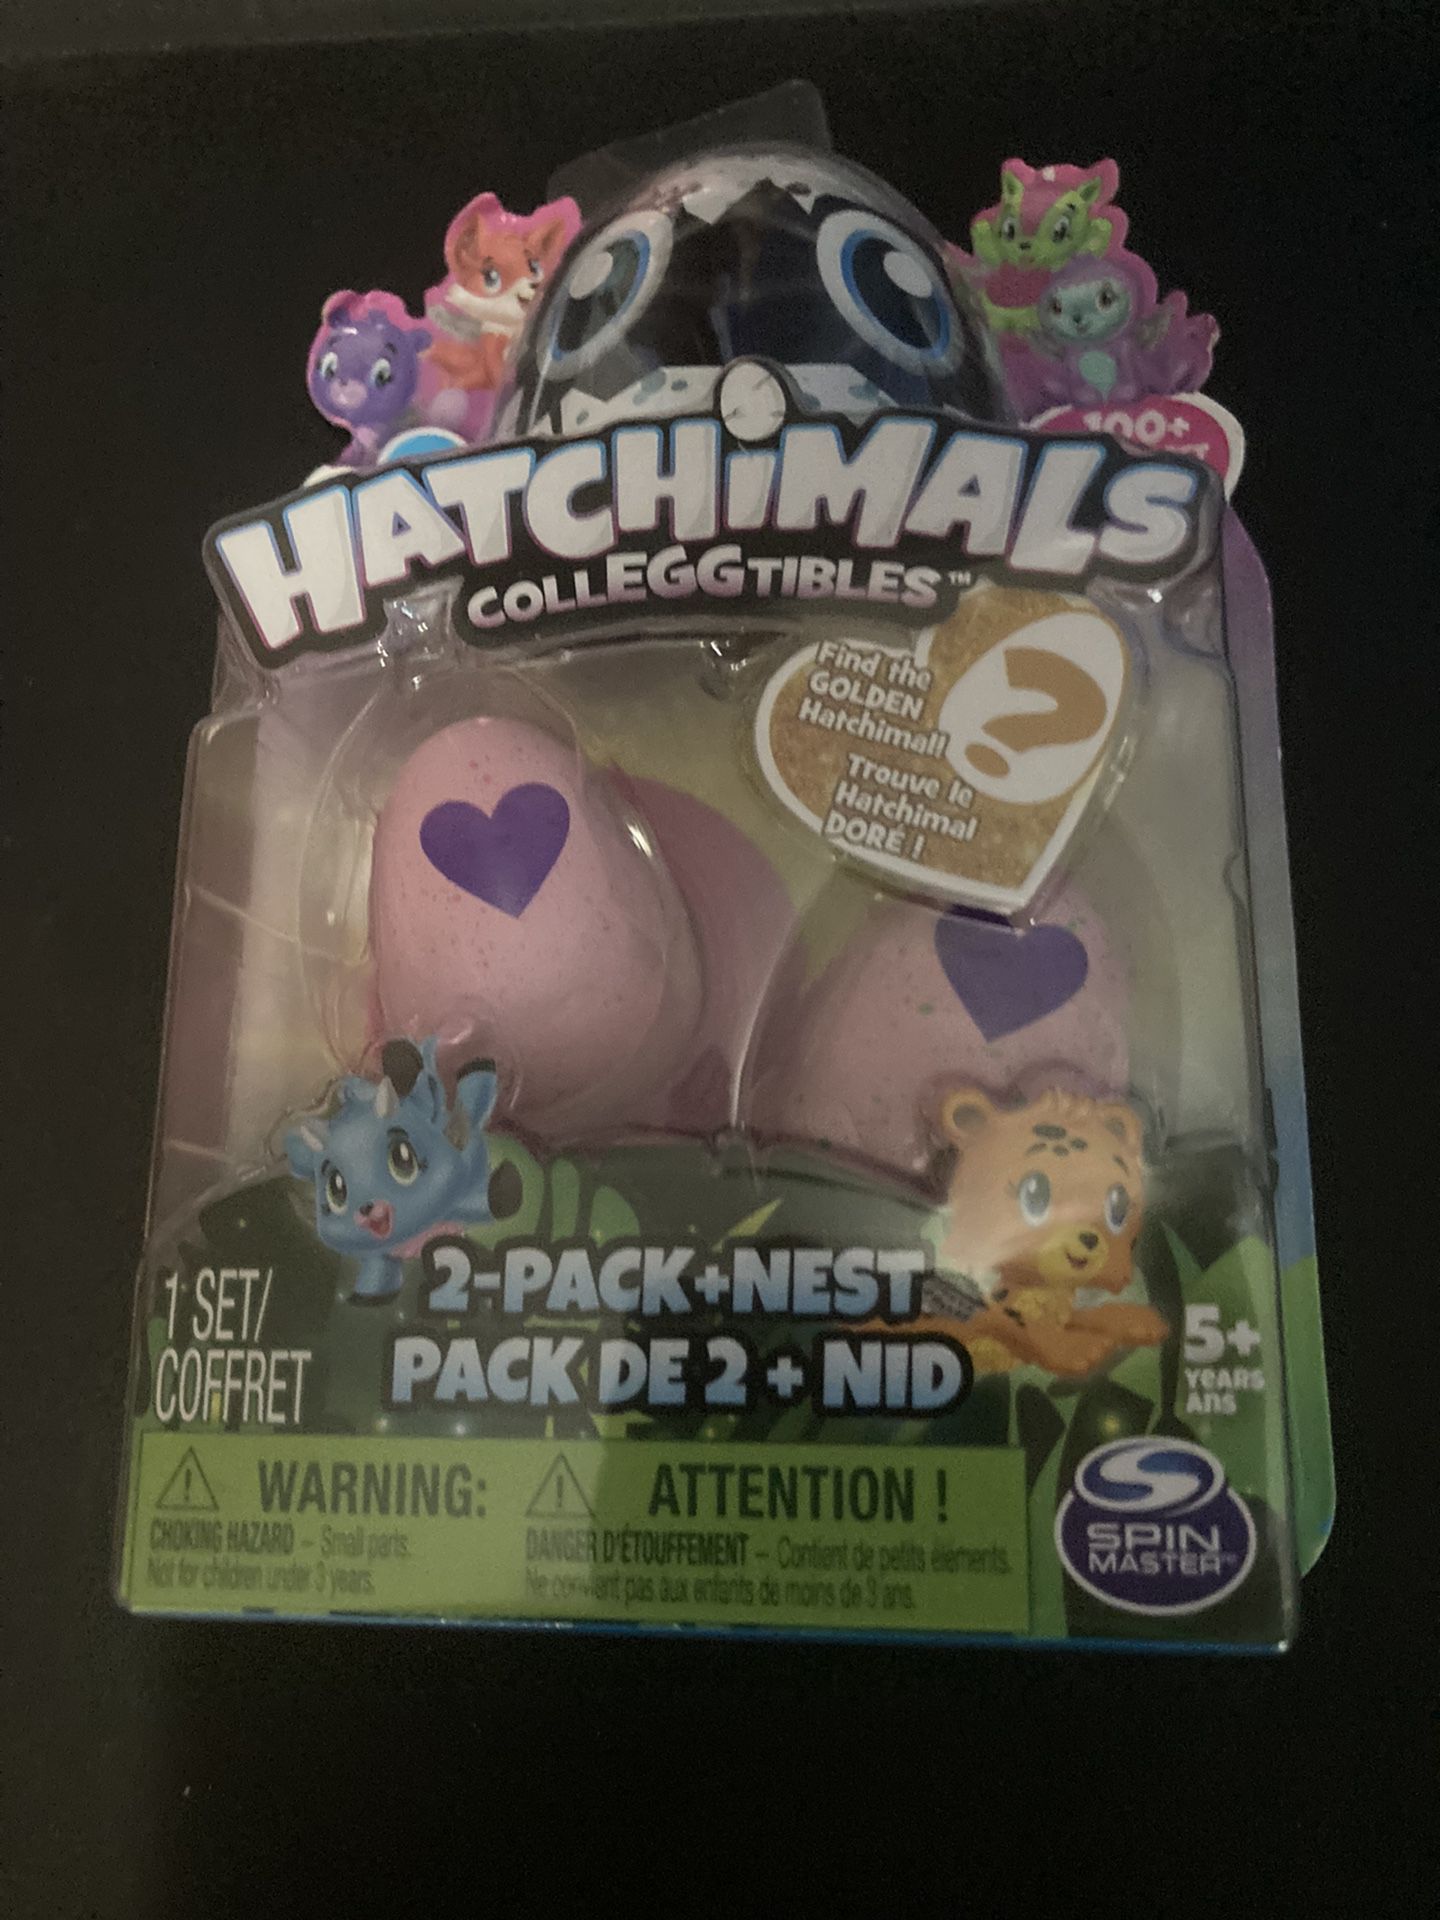 New, Hatchimals Toys $3 Per Pack, 15 Available